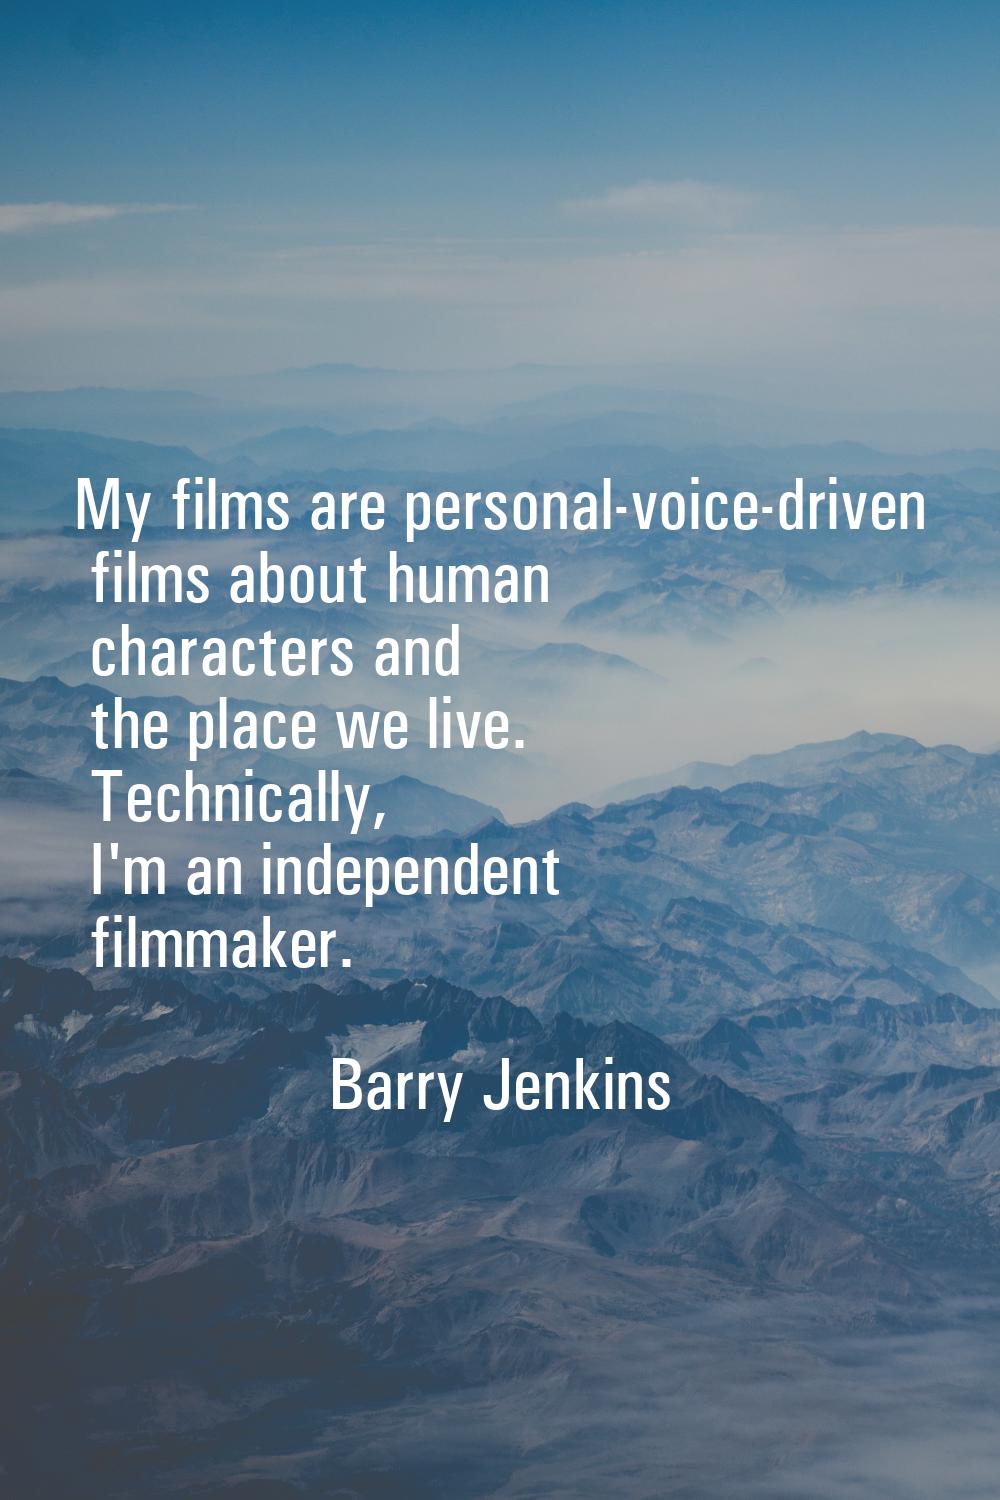 My films are personal-voice-driven films about human characters and the place we live. Technically,